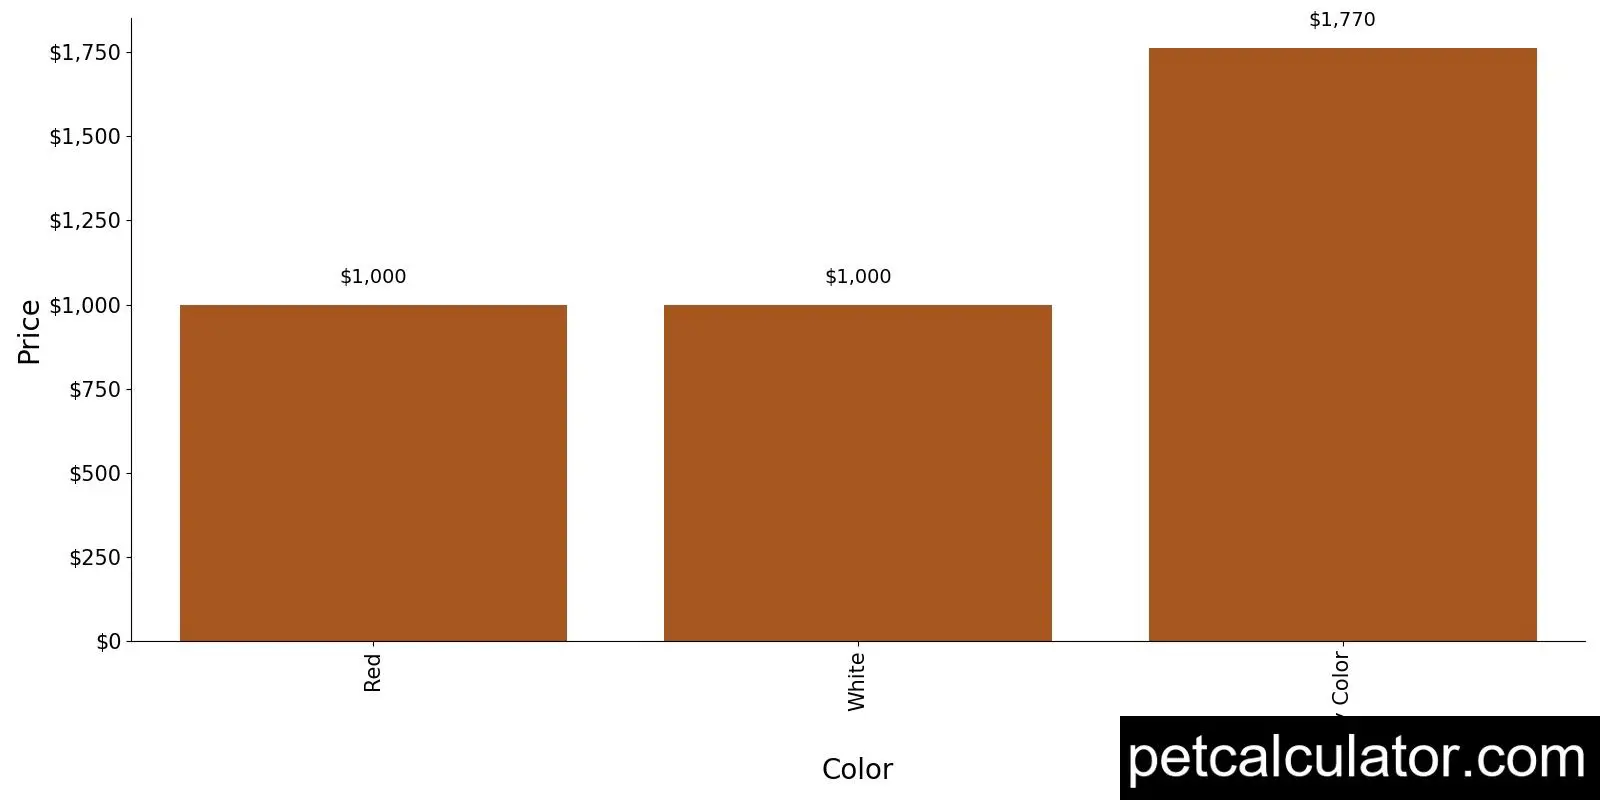 Price of Tibetan Spaniel by Color 